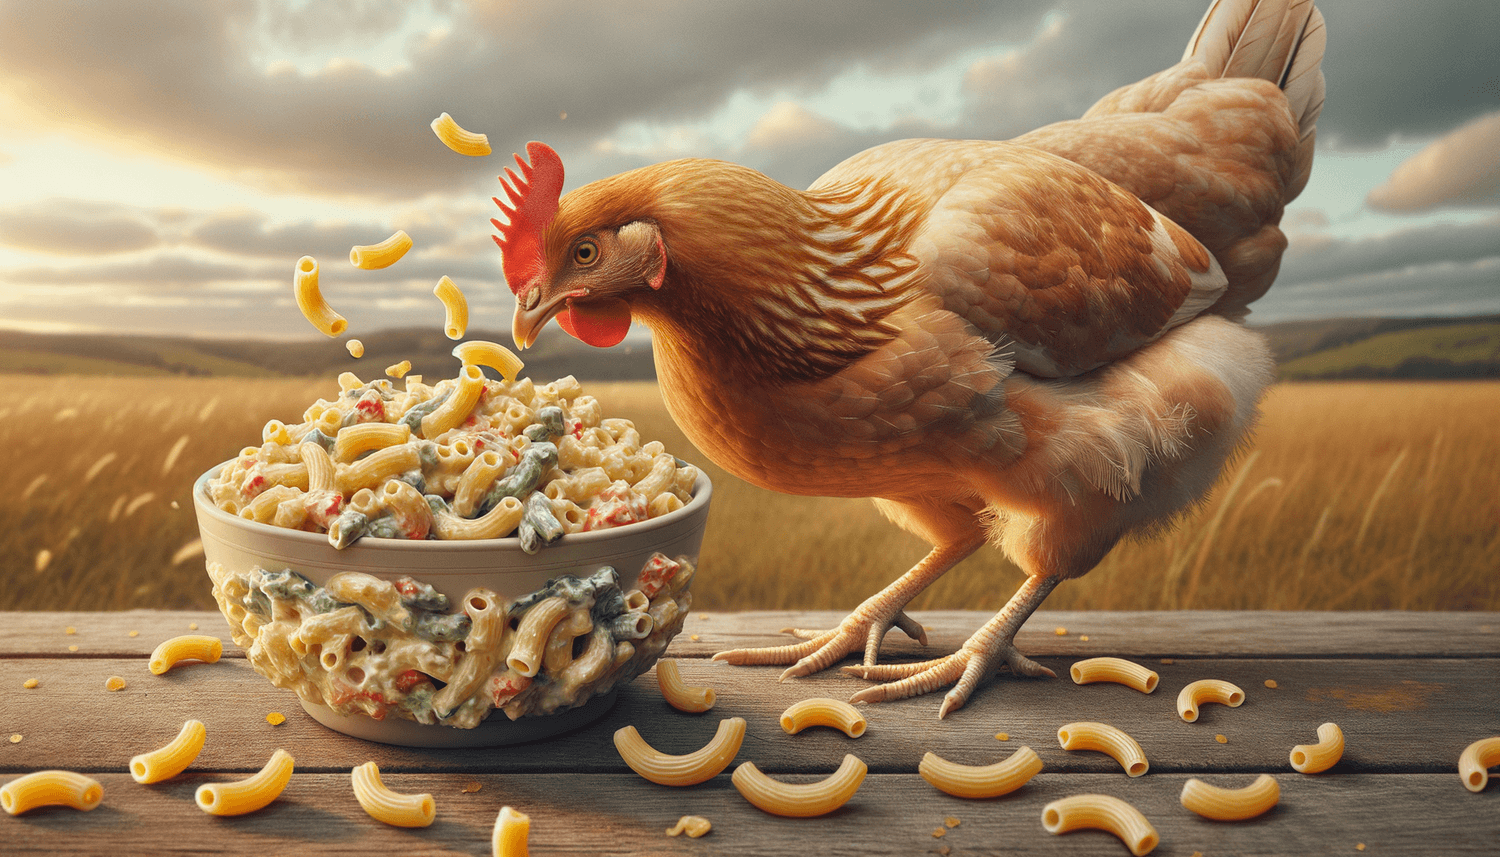 Can Chickens Eat Macaroni Salad?